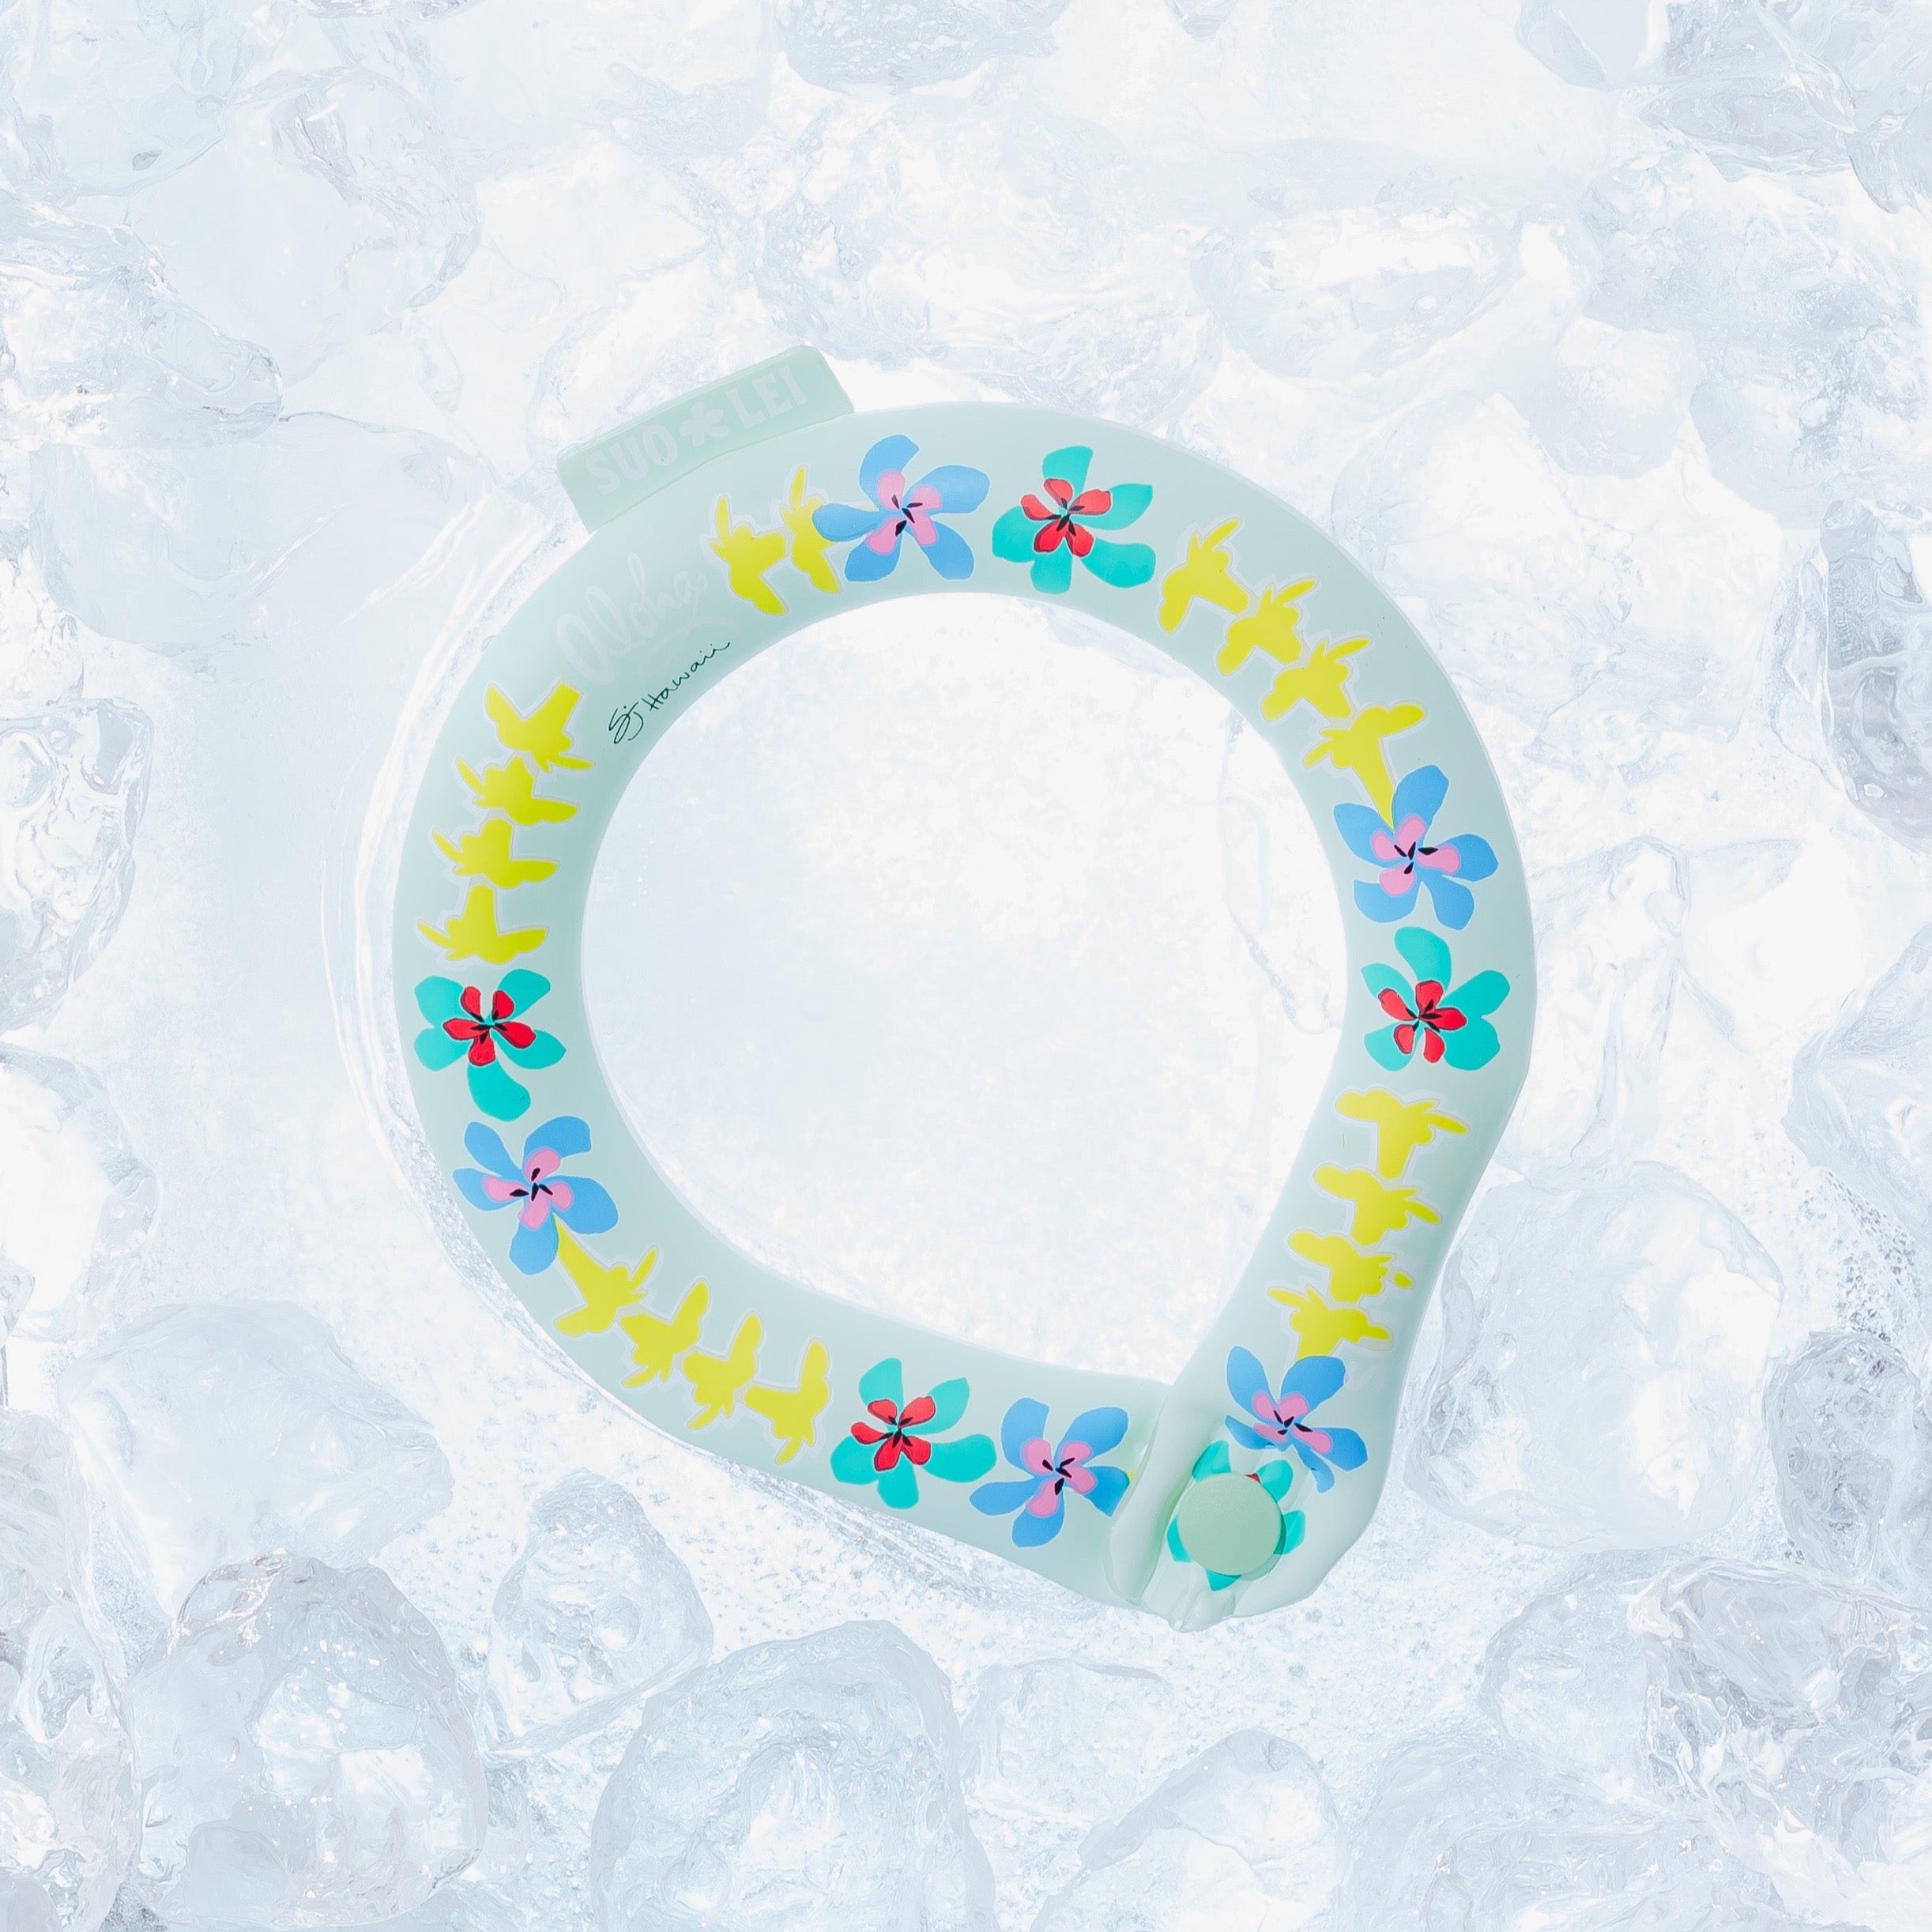 SUO RING 28°ICE for dogs hawaii ボタン付